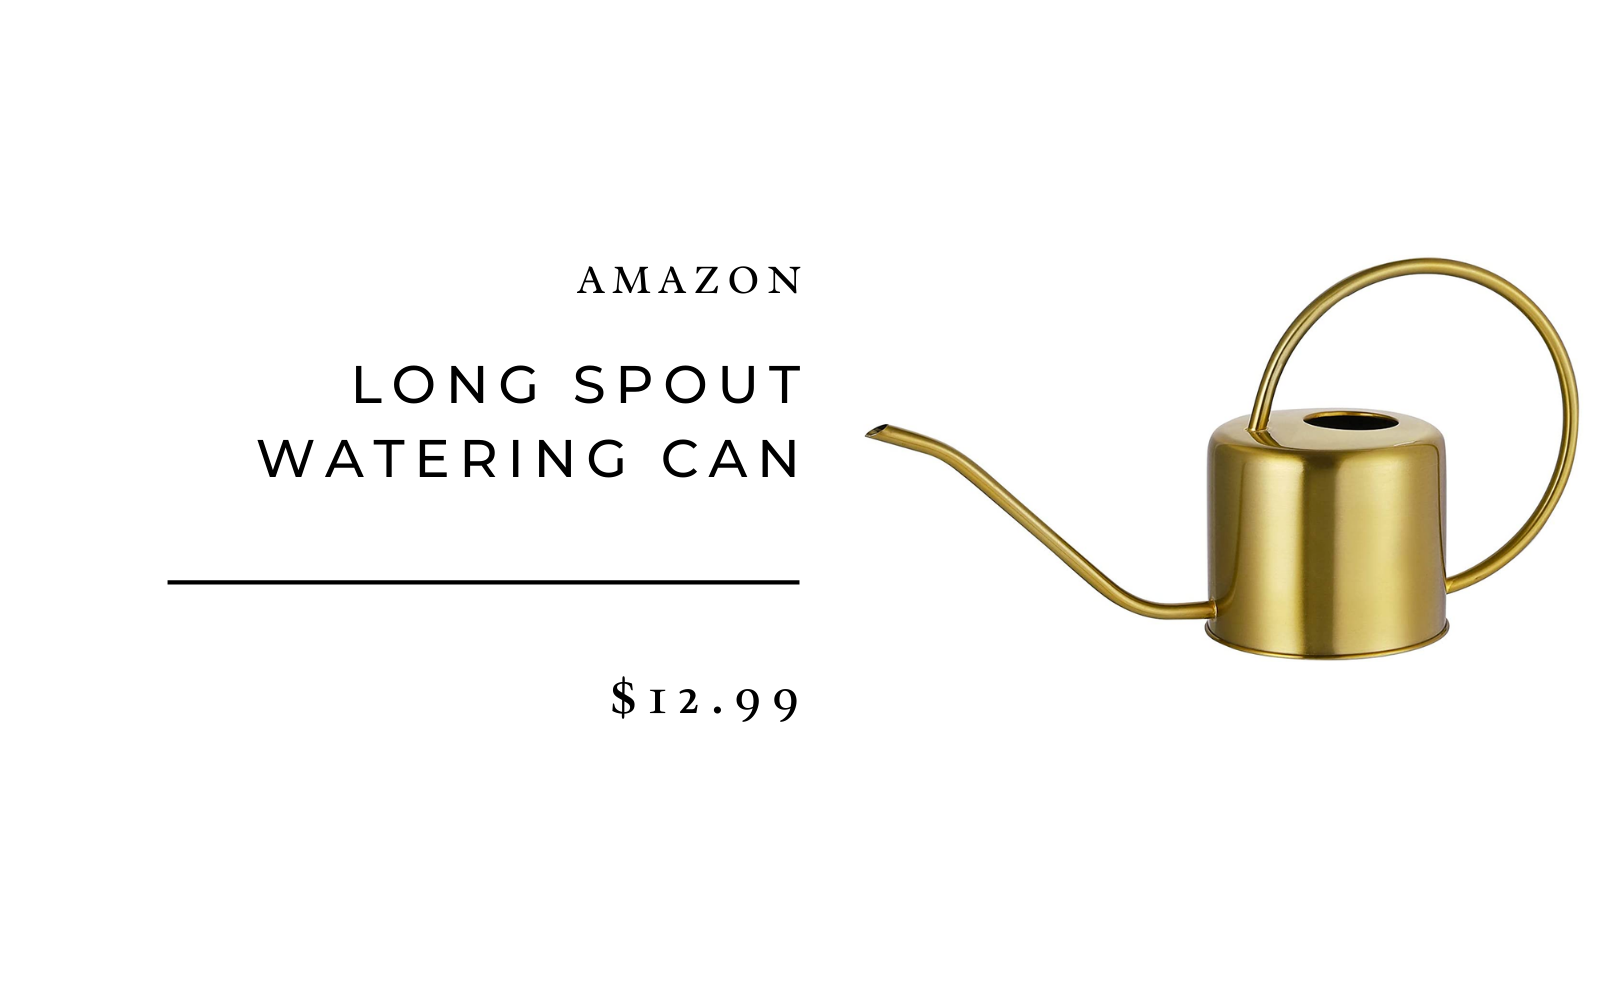 long spout watering can amazon